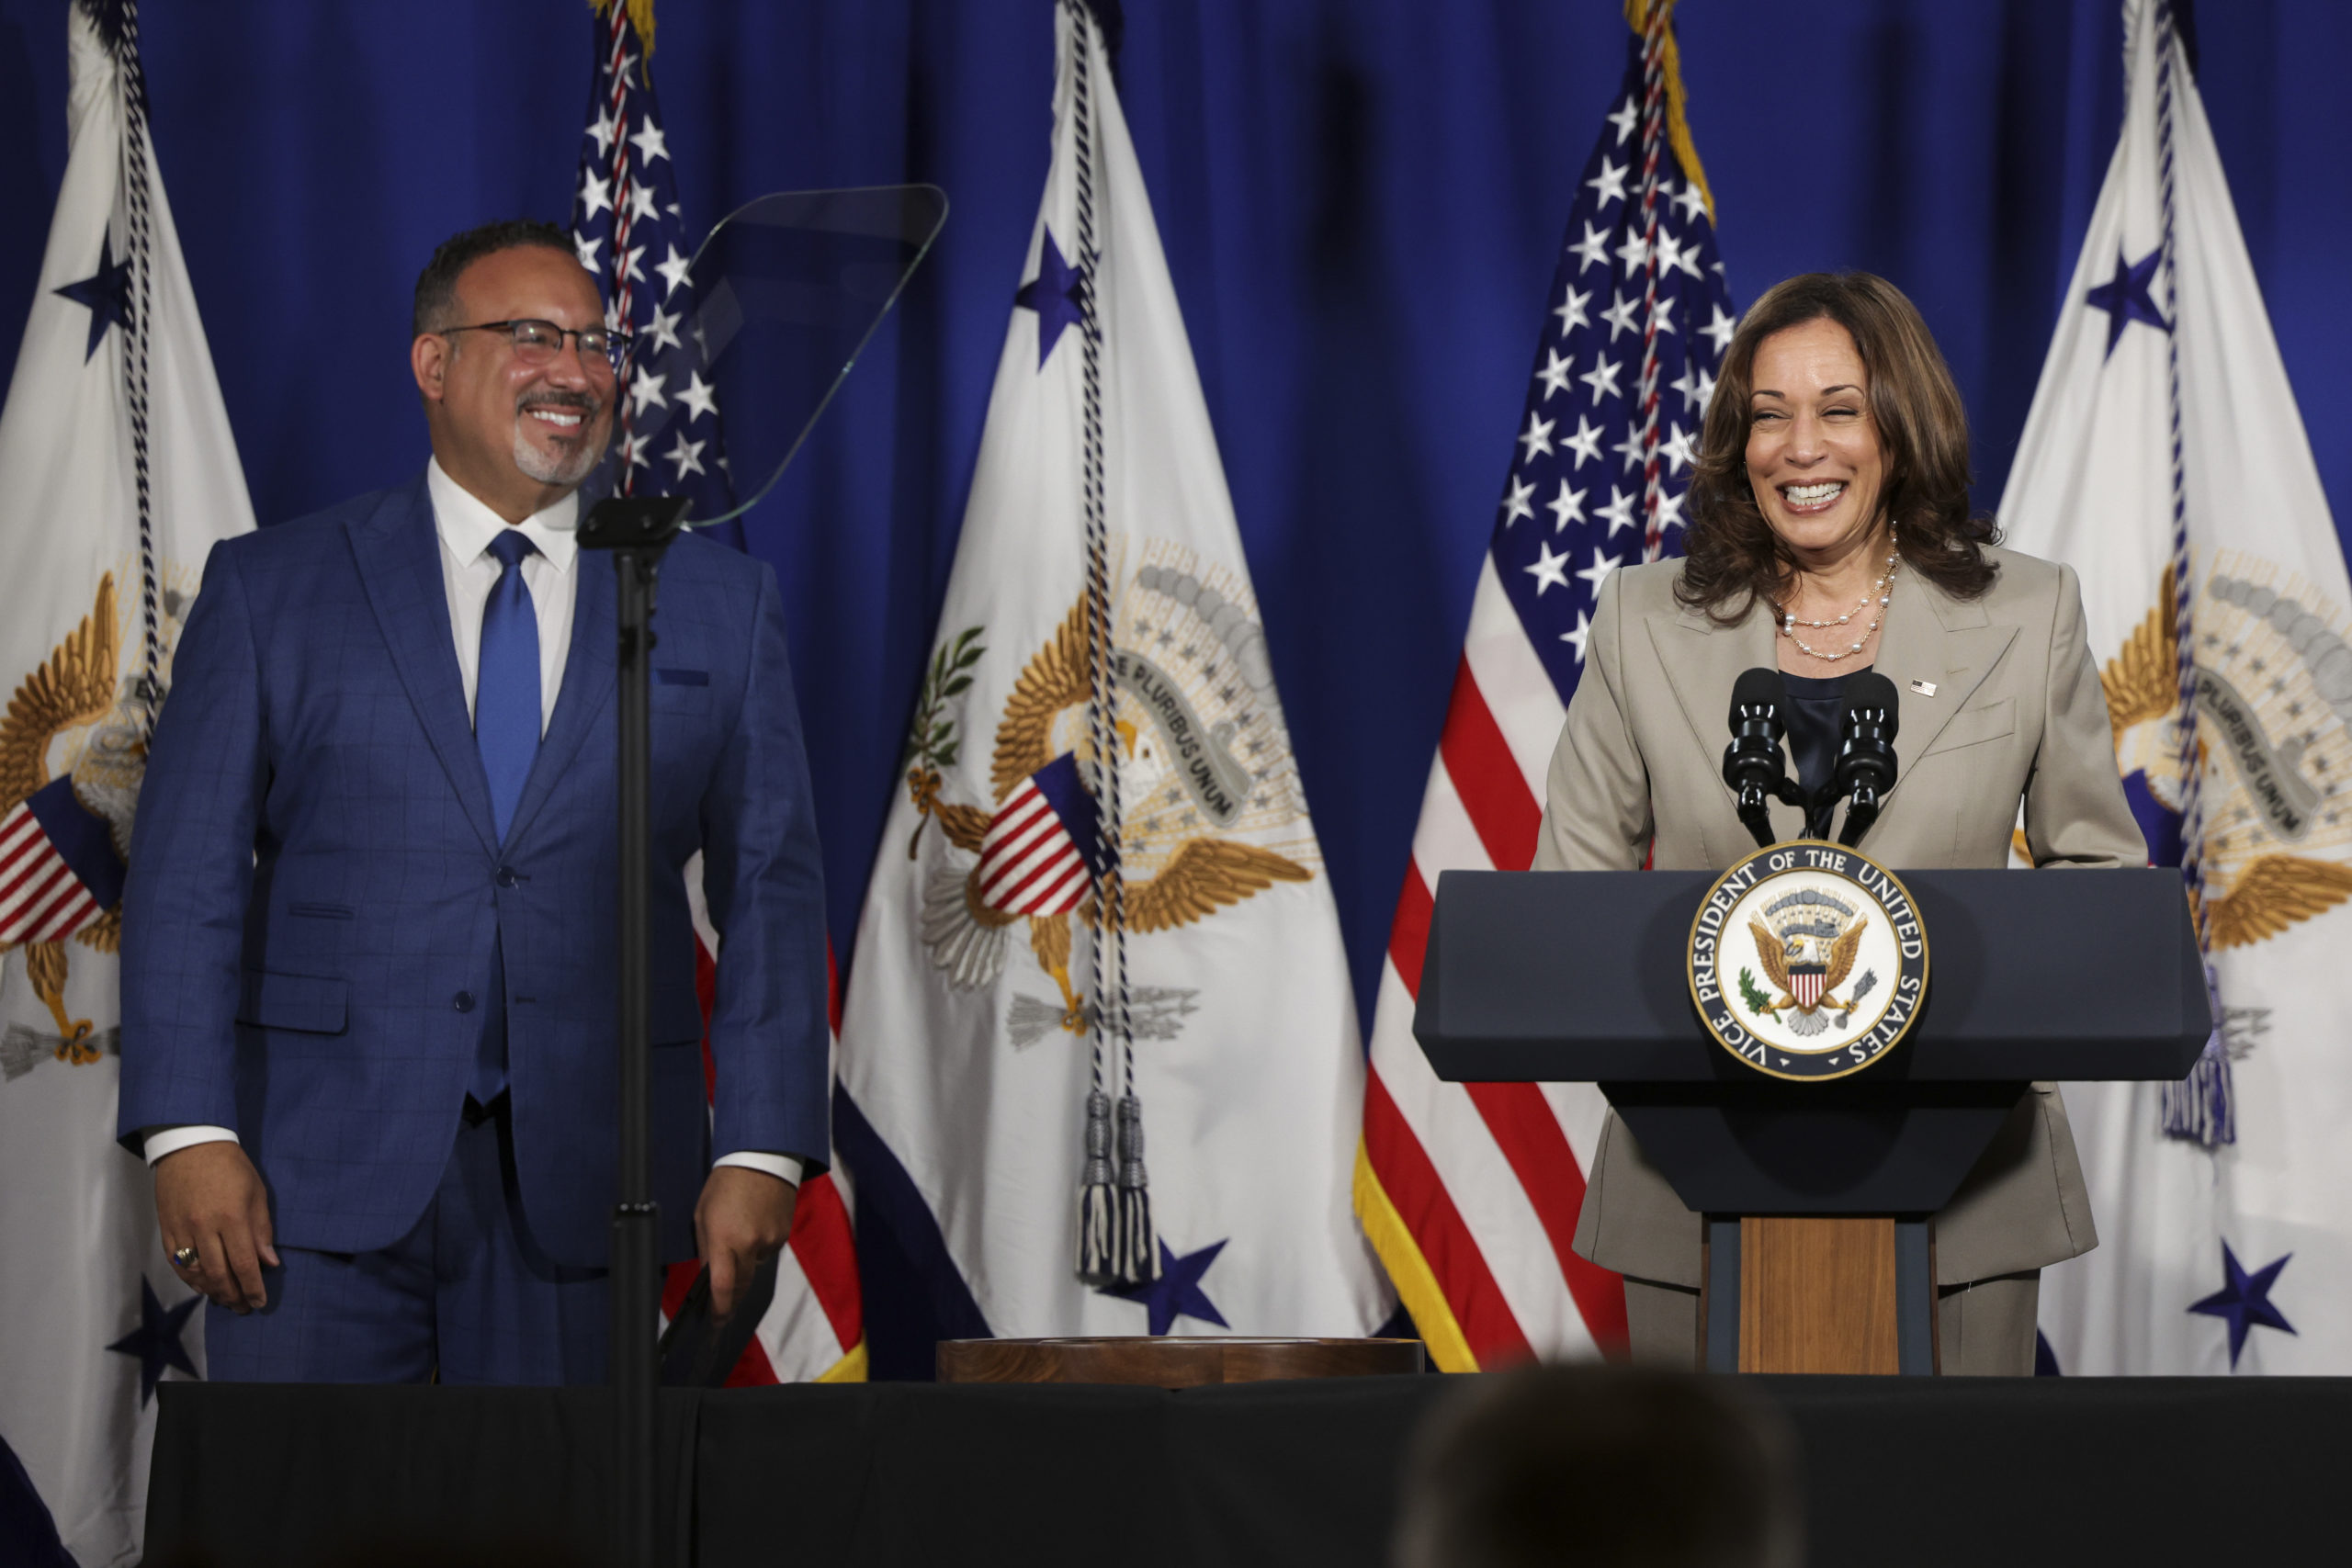 U.S. Vice President Kamala Harris speaks alongside Education Secretary Miguel Cardona as she delivers remarks on Corinthian Colleges student loan forgiveness, at the Department of Education on June 02, 2022 in Washington, DC. Harris announced the Biden Administration will cancel student debt for over half a million students from Corinthian Colleges, formerly one of the largest for-profit colleges, totalling nearly $5.8 billion in loans. (Photo by Kevin Dietsch/Getty Images)